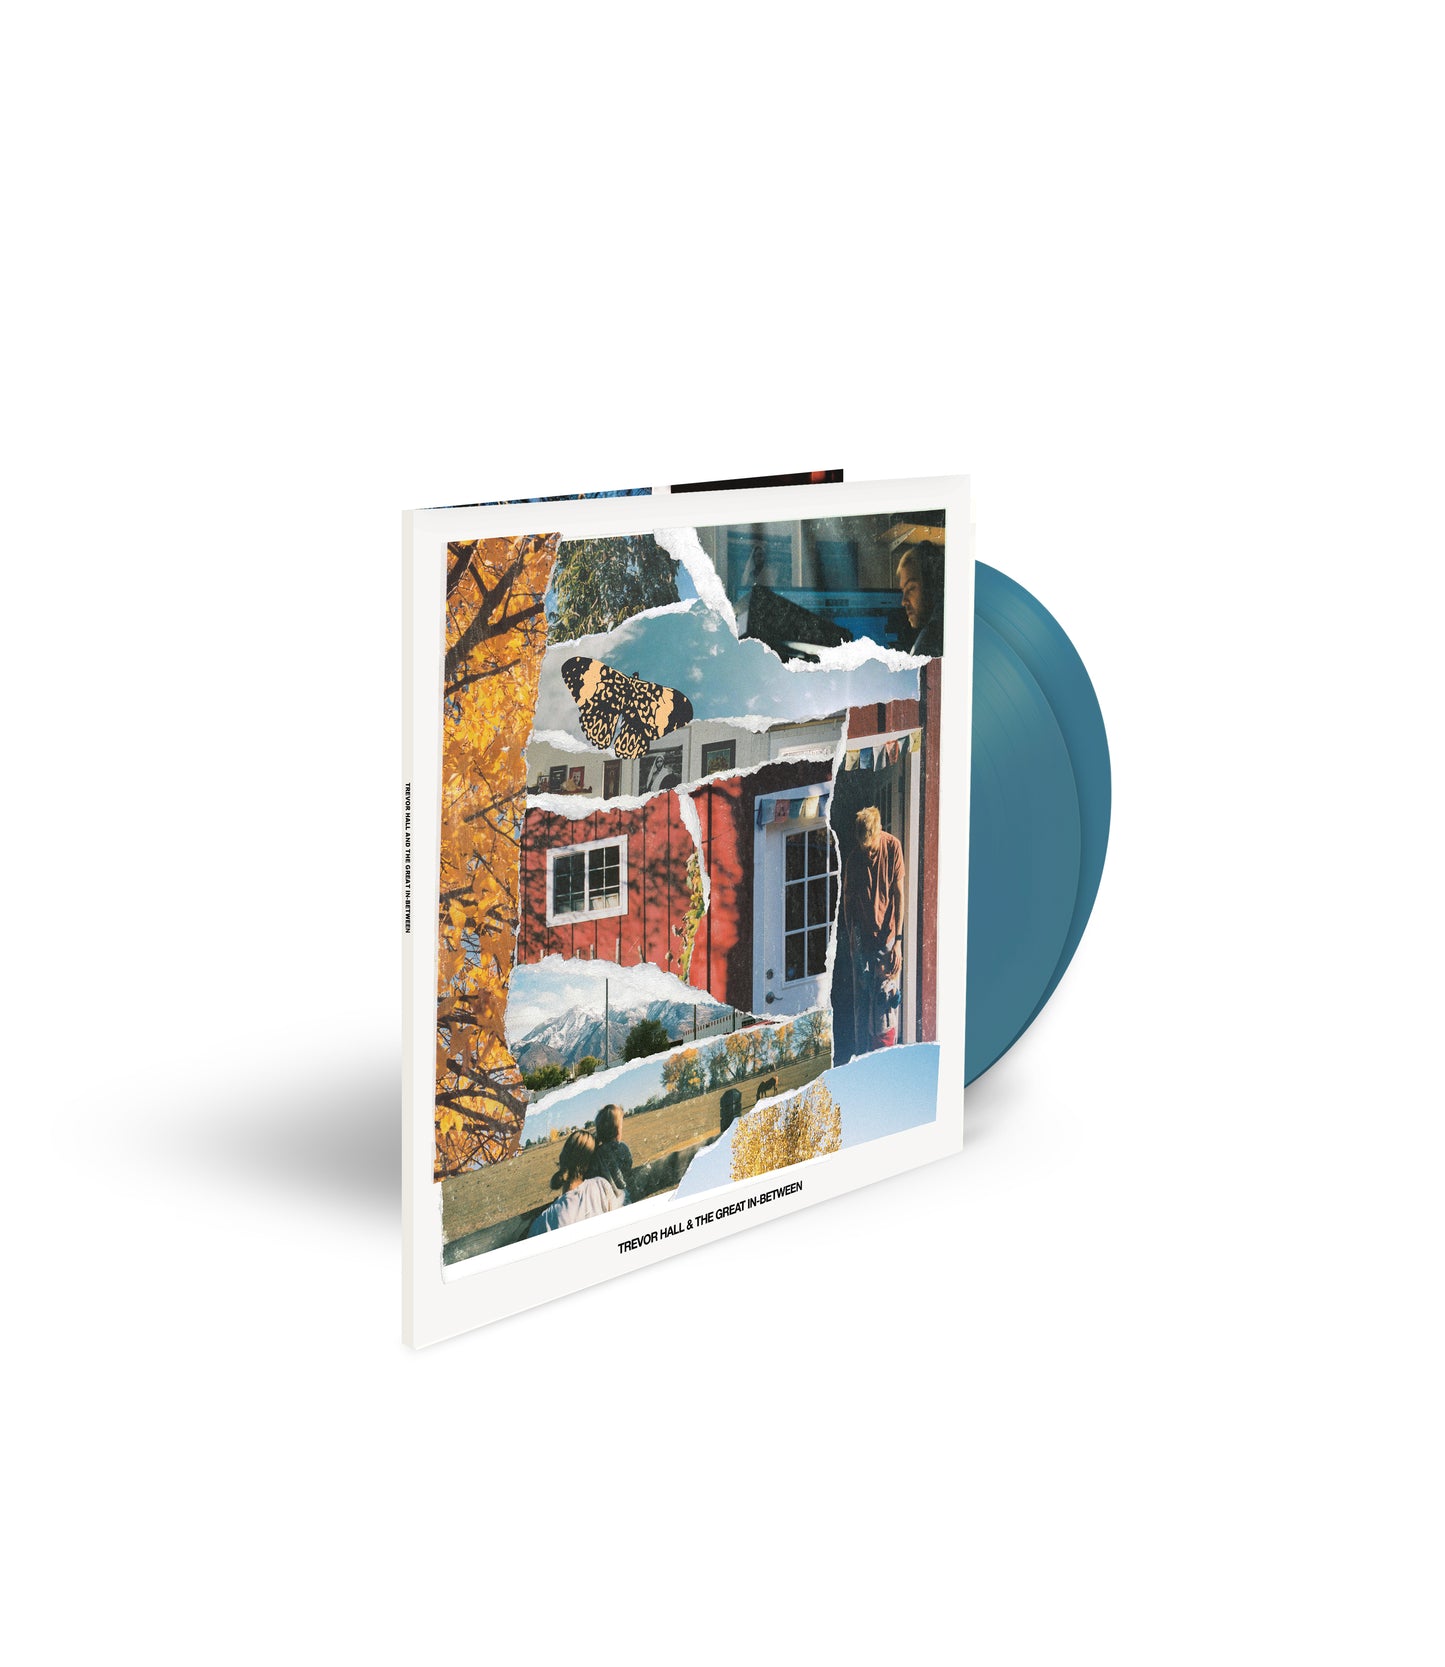 Trevor Hall and The Great In-Between Blue Vinyl